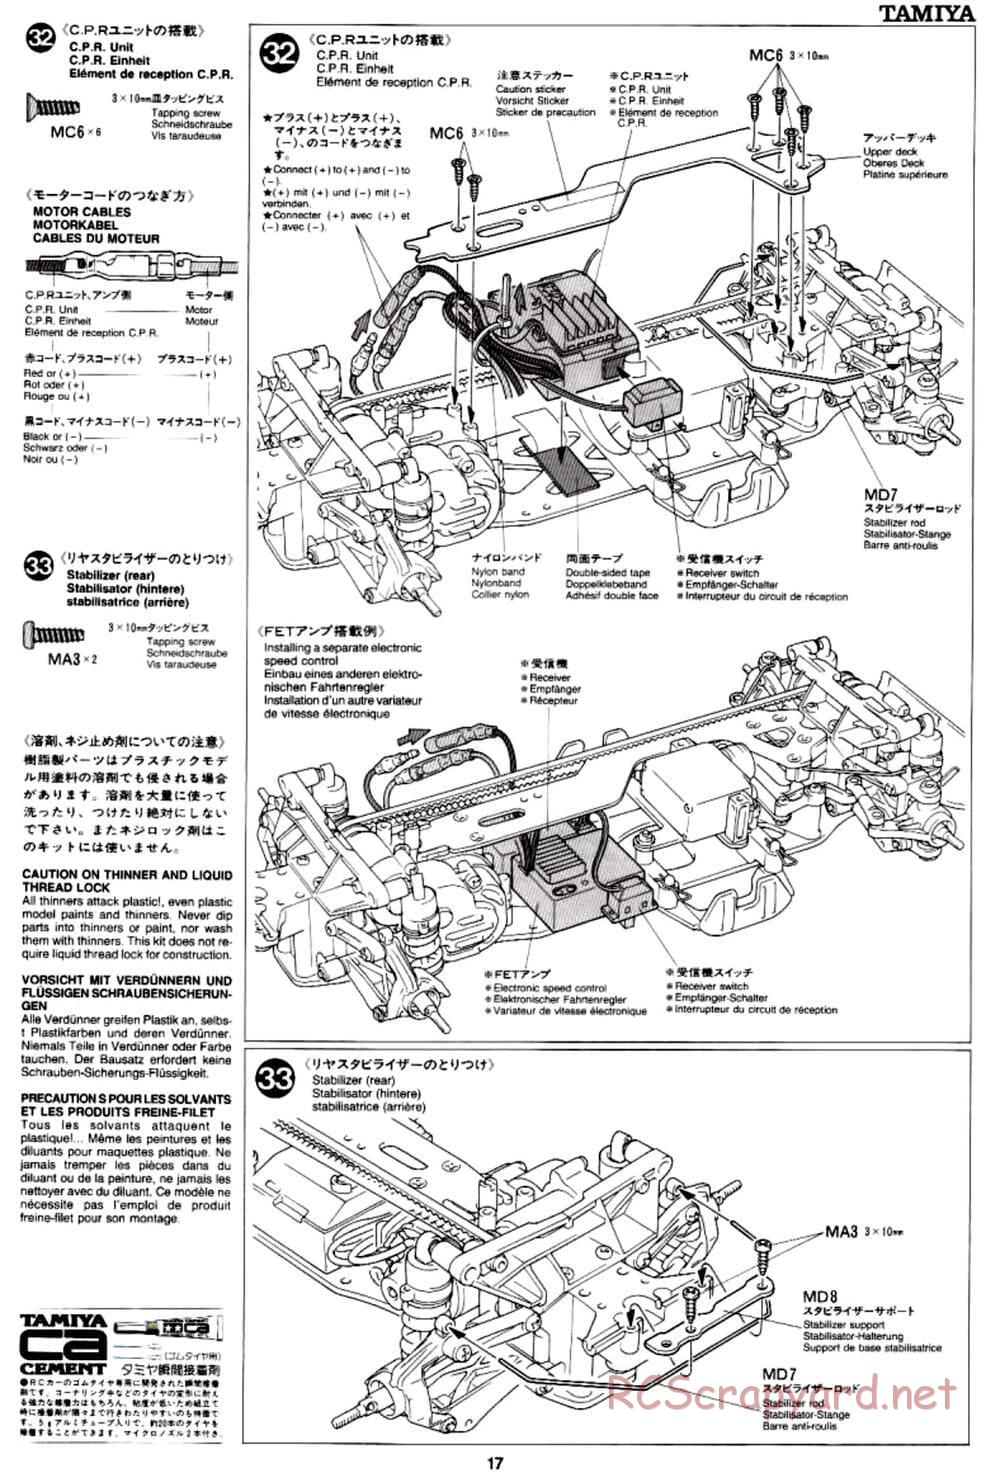 Tamiya - TA-03R TRF Special Edition Chassis - Manual - Page 17